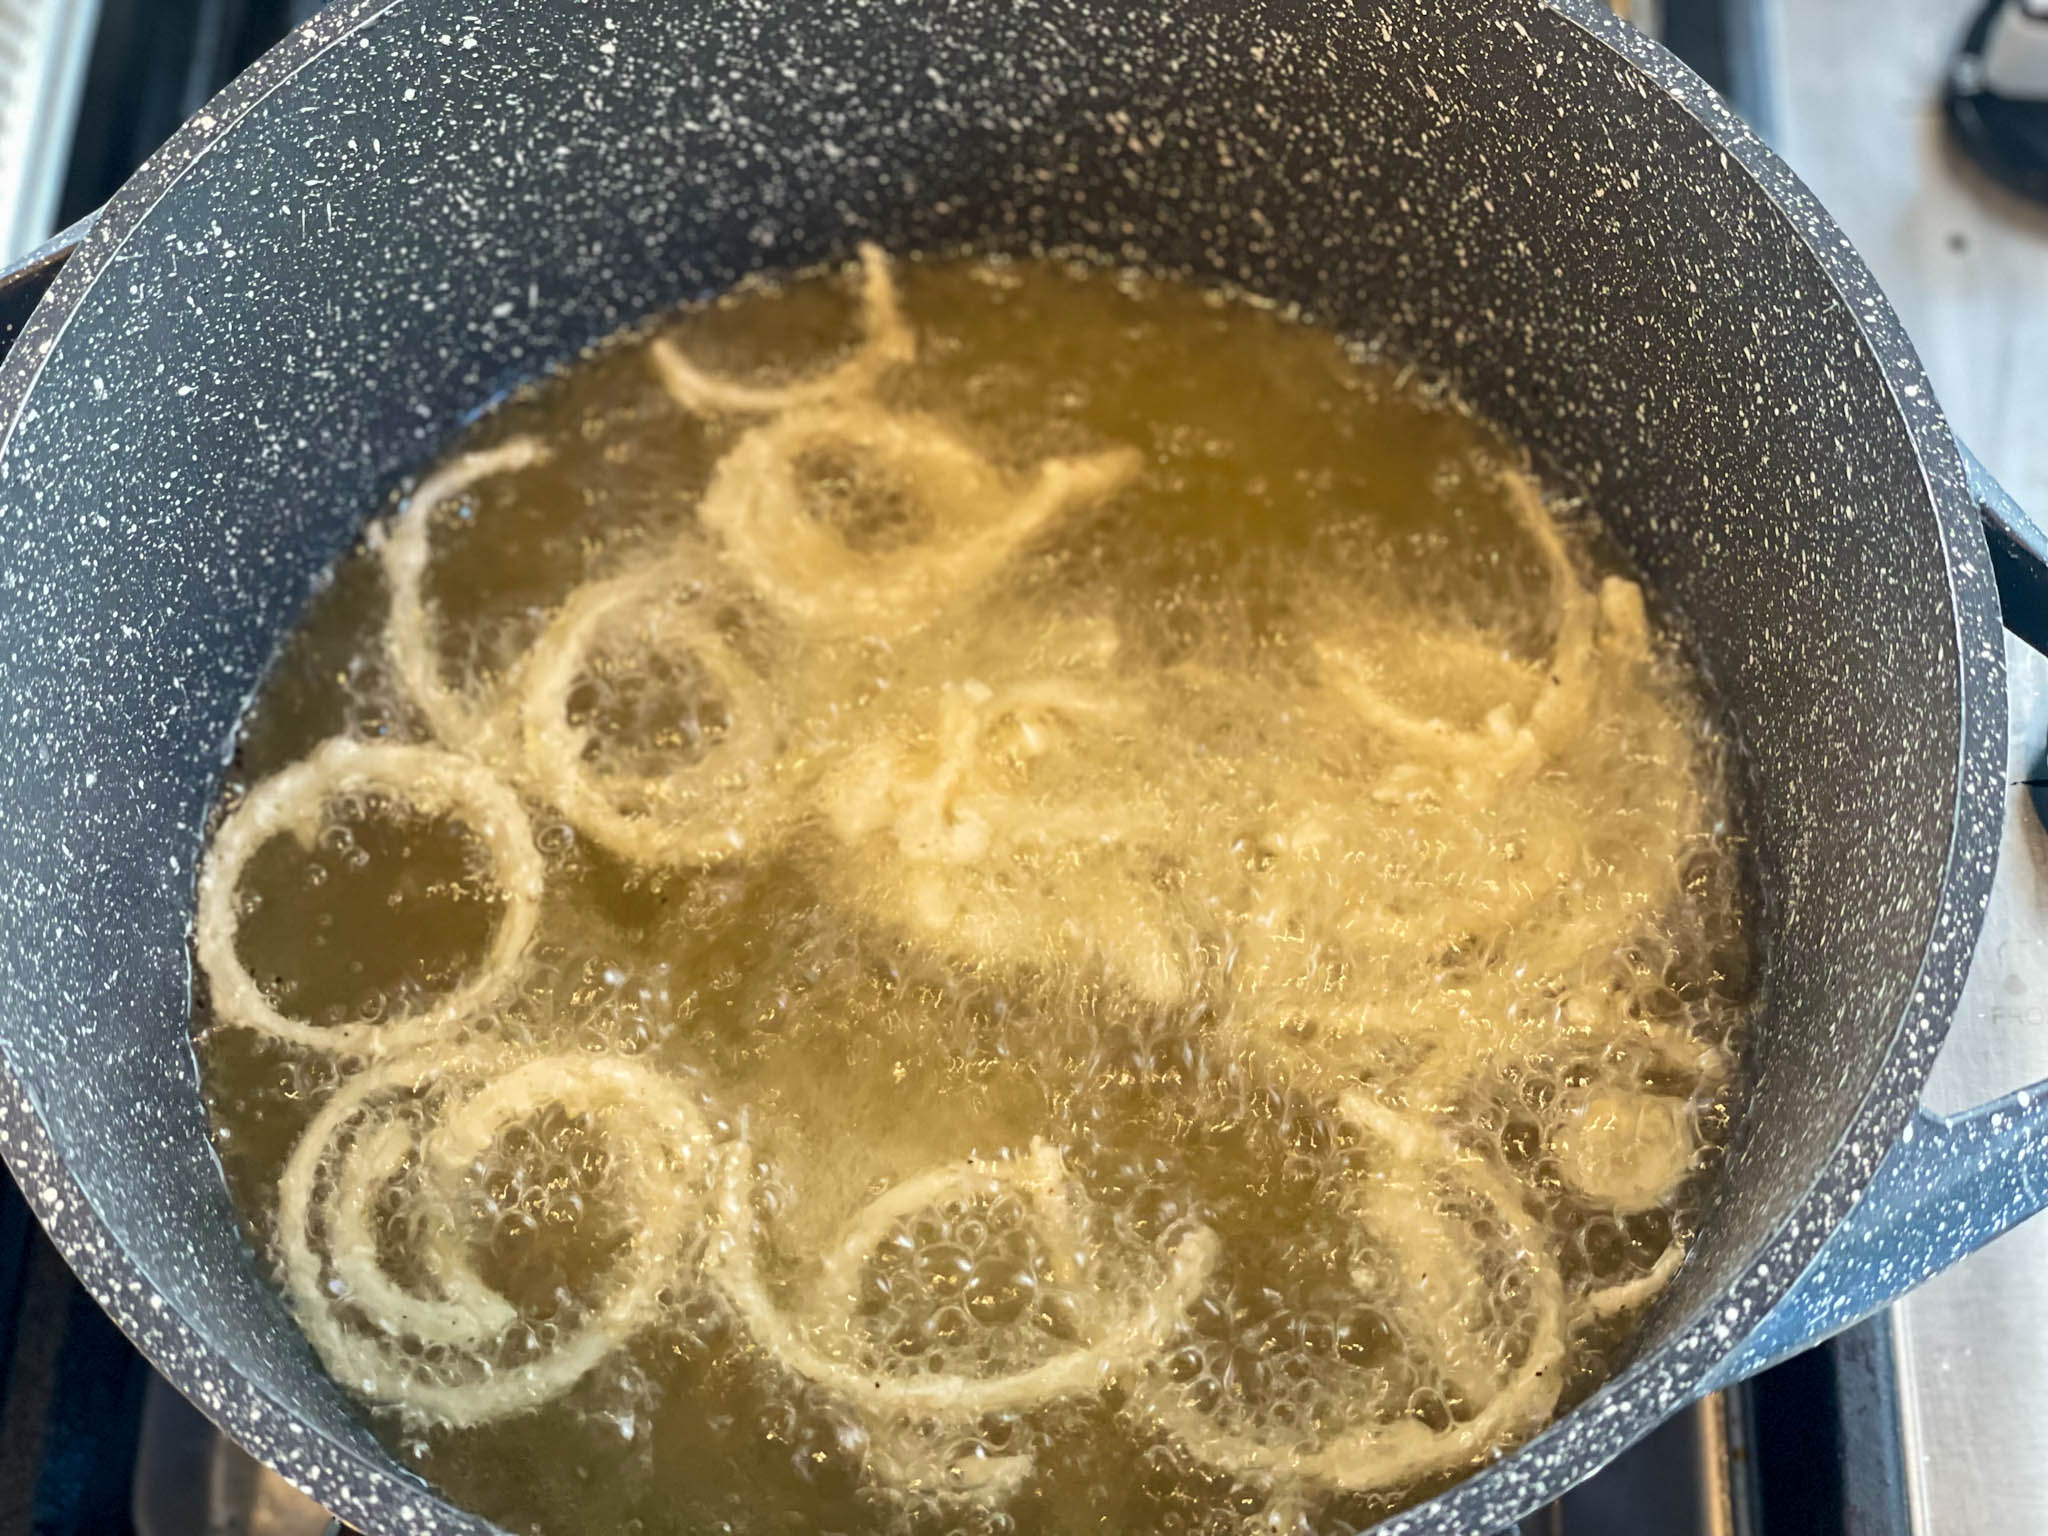 Onions frying in oil in a pot to be used as a topping for the ensalada con pollo.